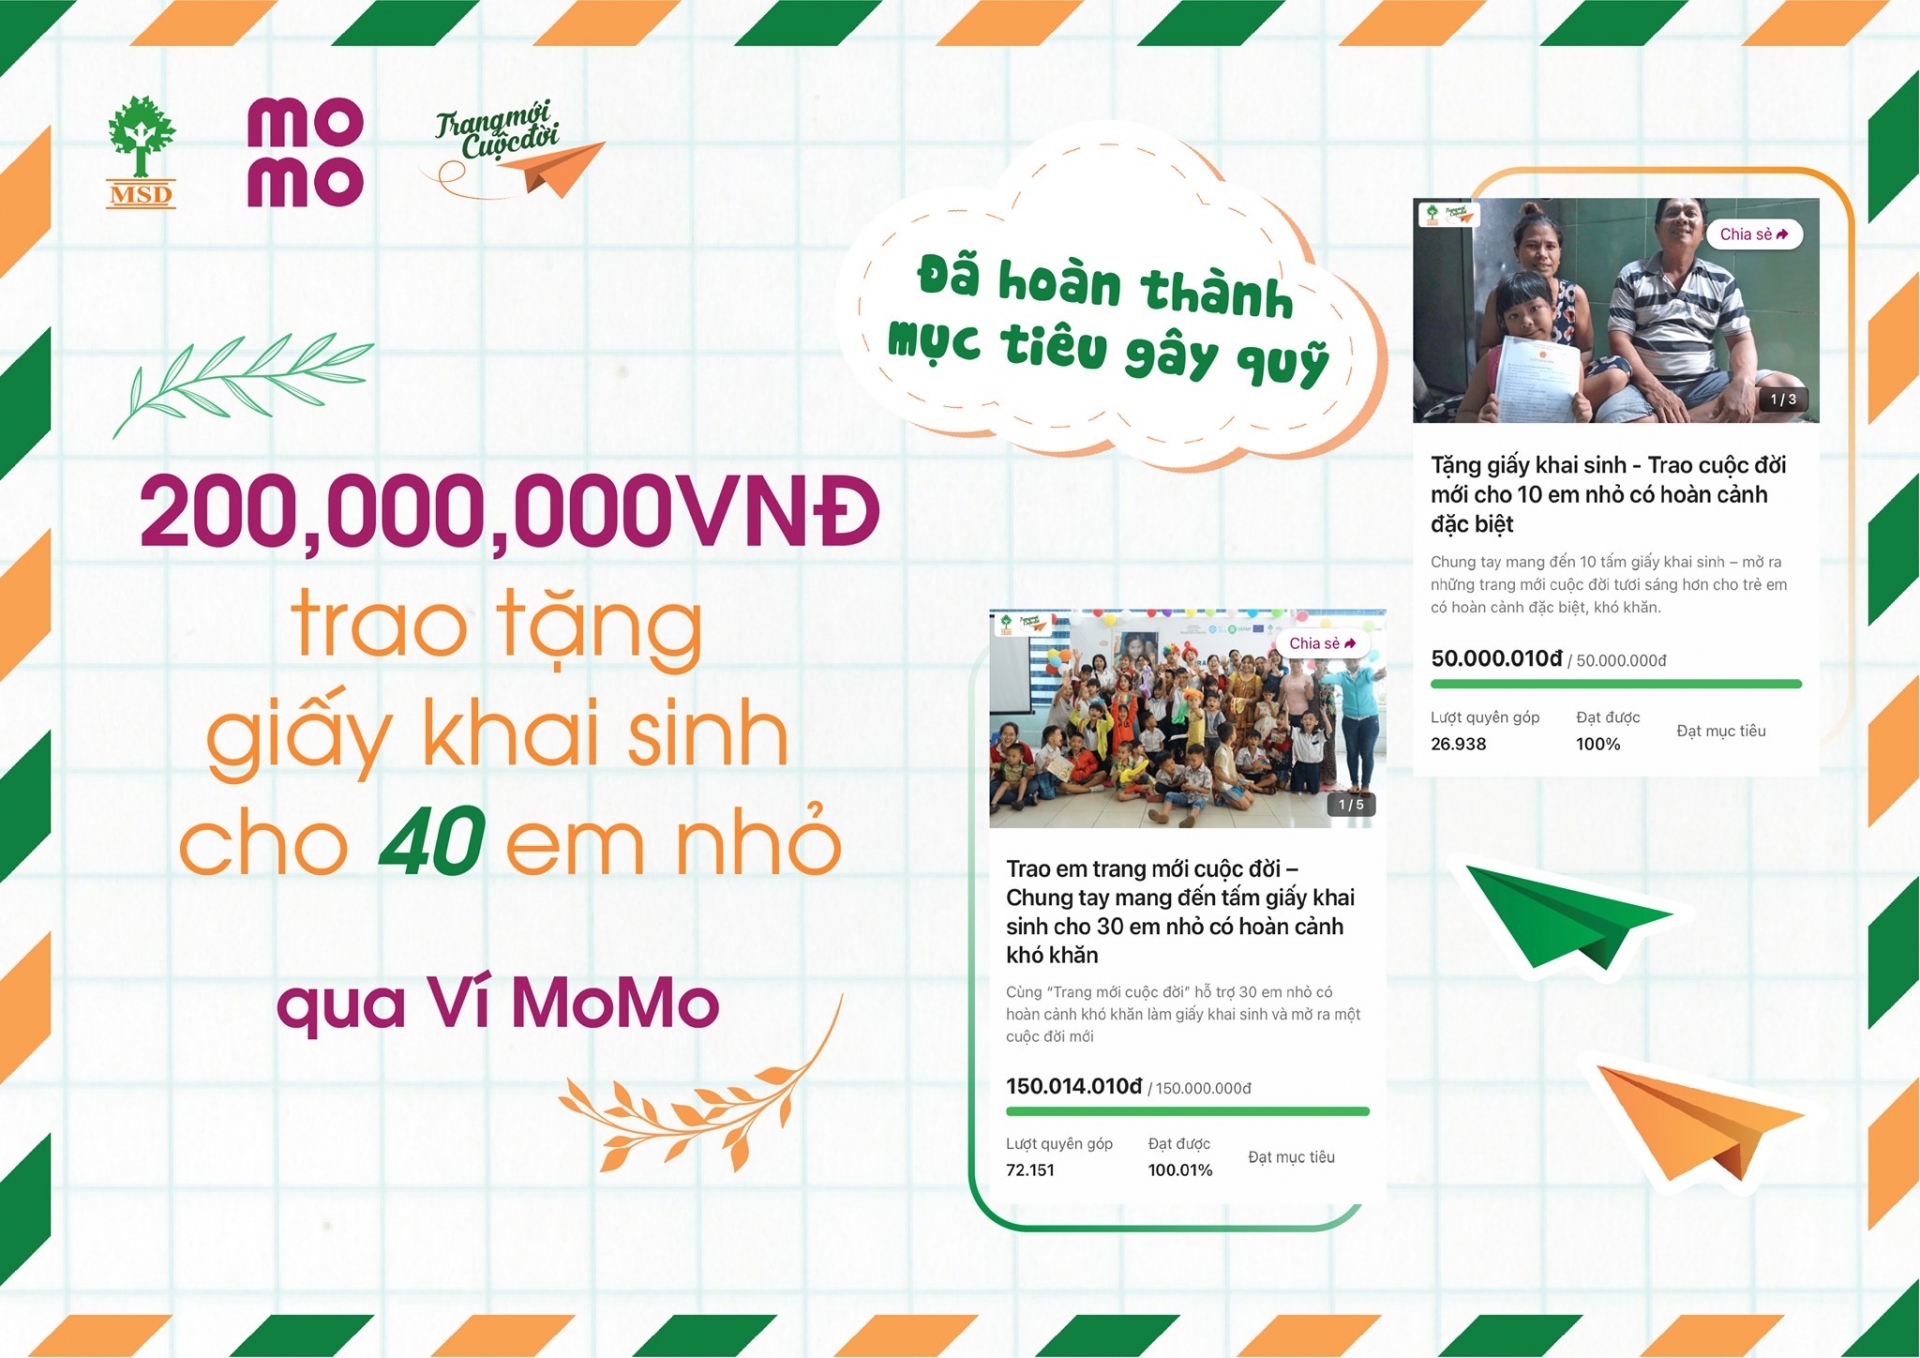 MoMo, NGO helps disadvantaged children in HCM City get personal documents